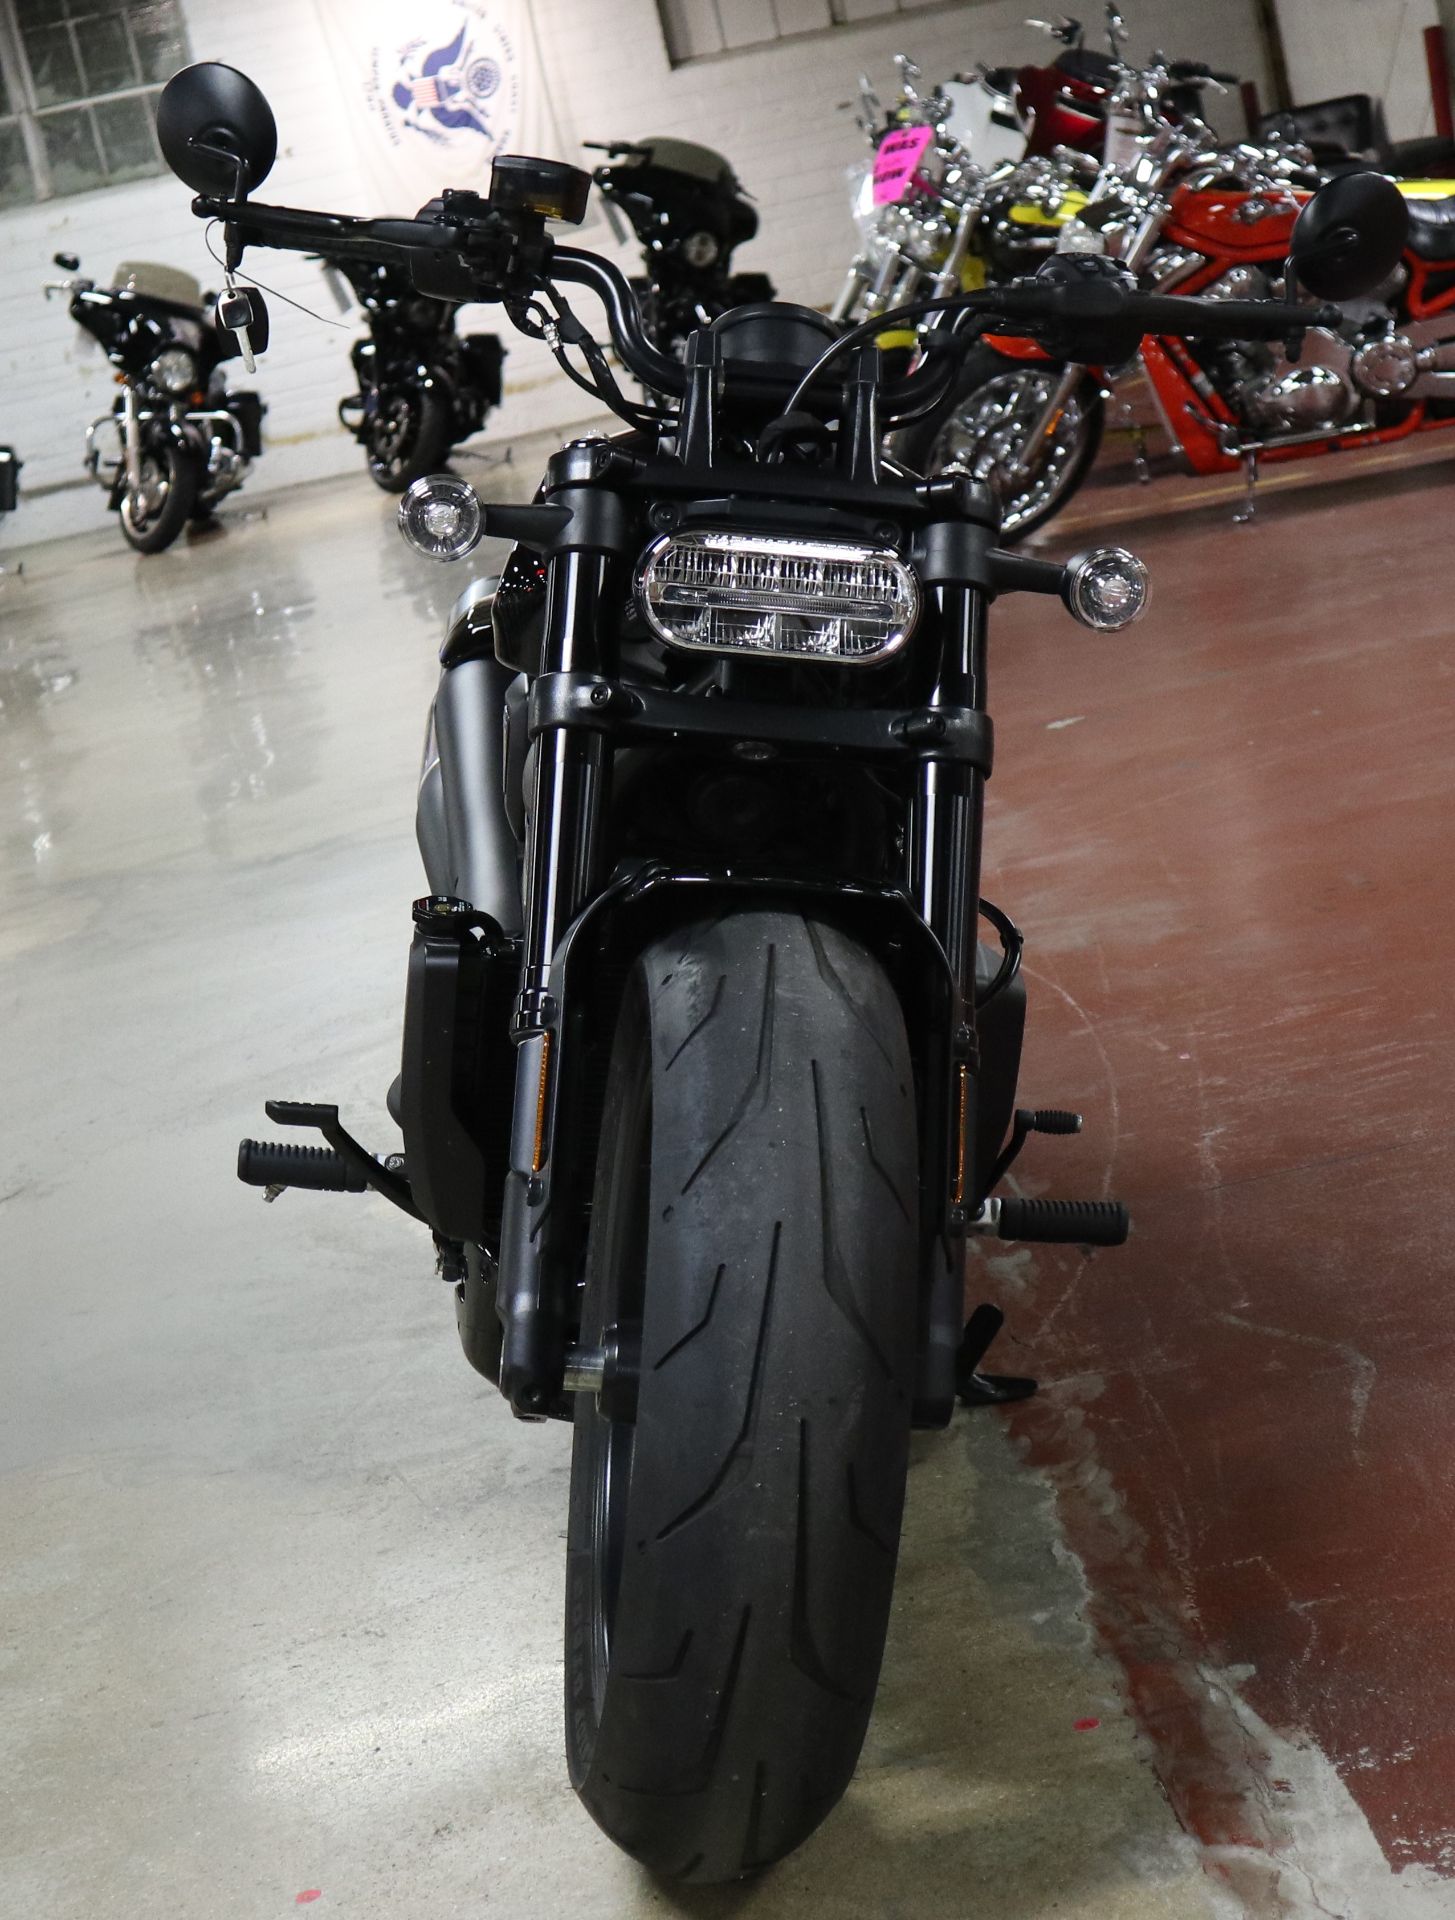 2021 Harley-Davidson Sportster® S in New London, Connecticut - Photo 3